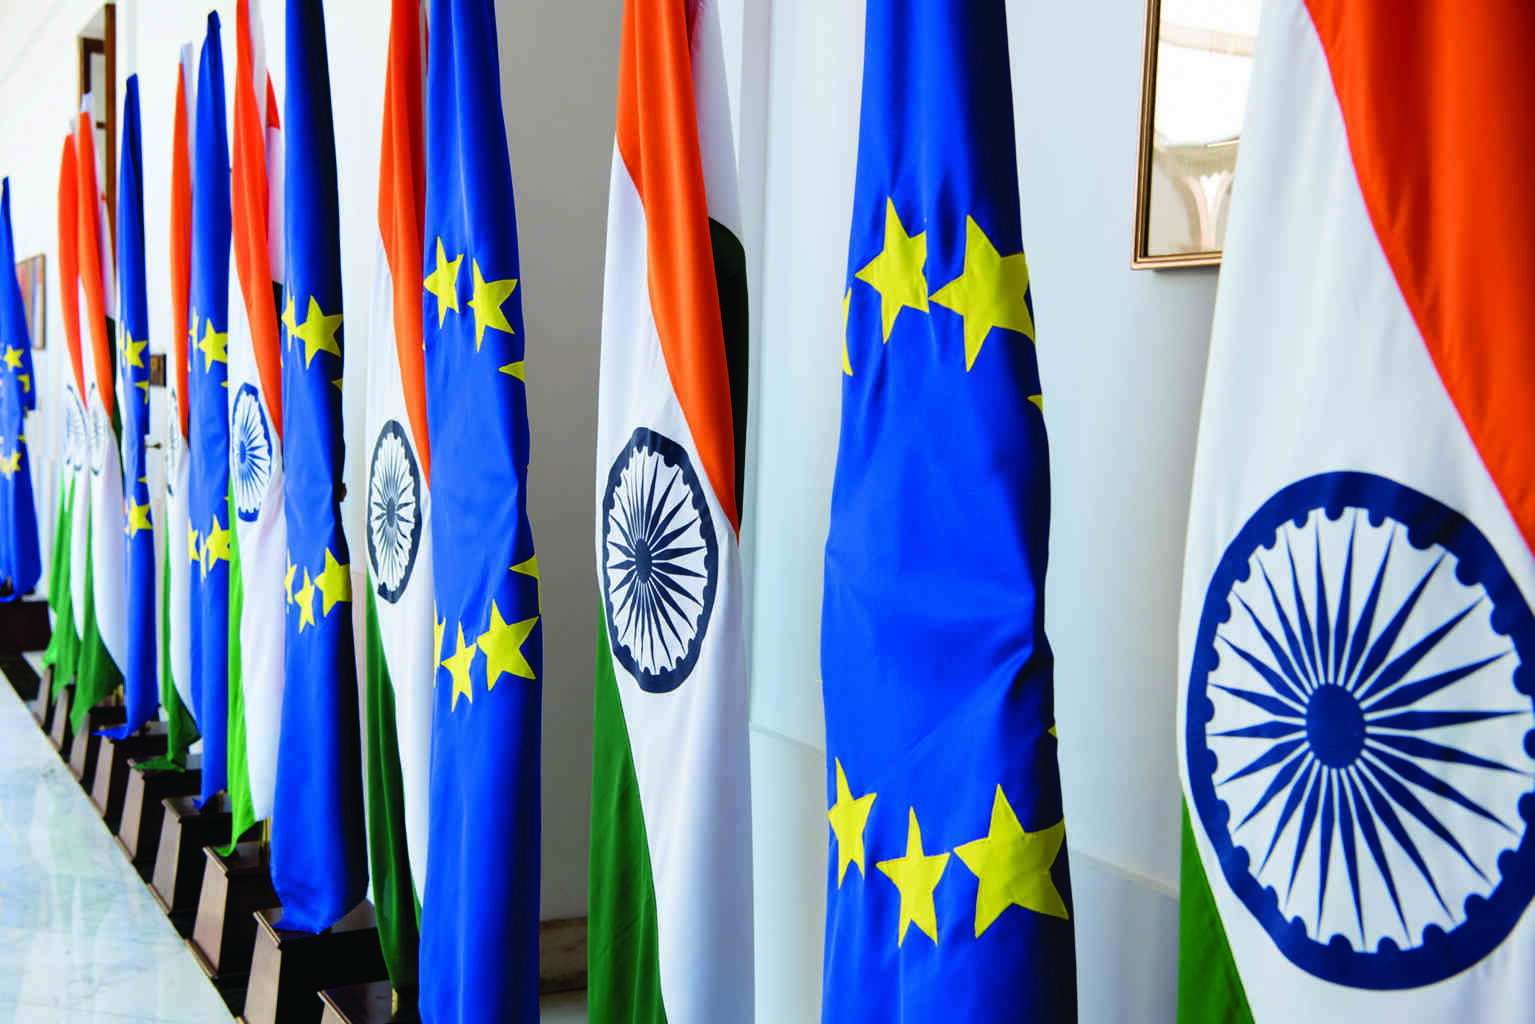 Next round of talks for India-EU free trade pact at Brussels in Sept